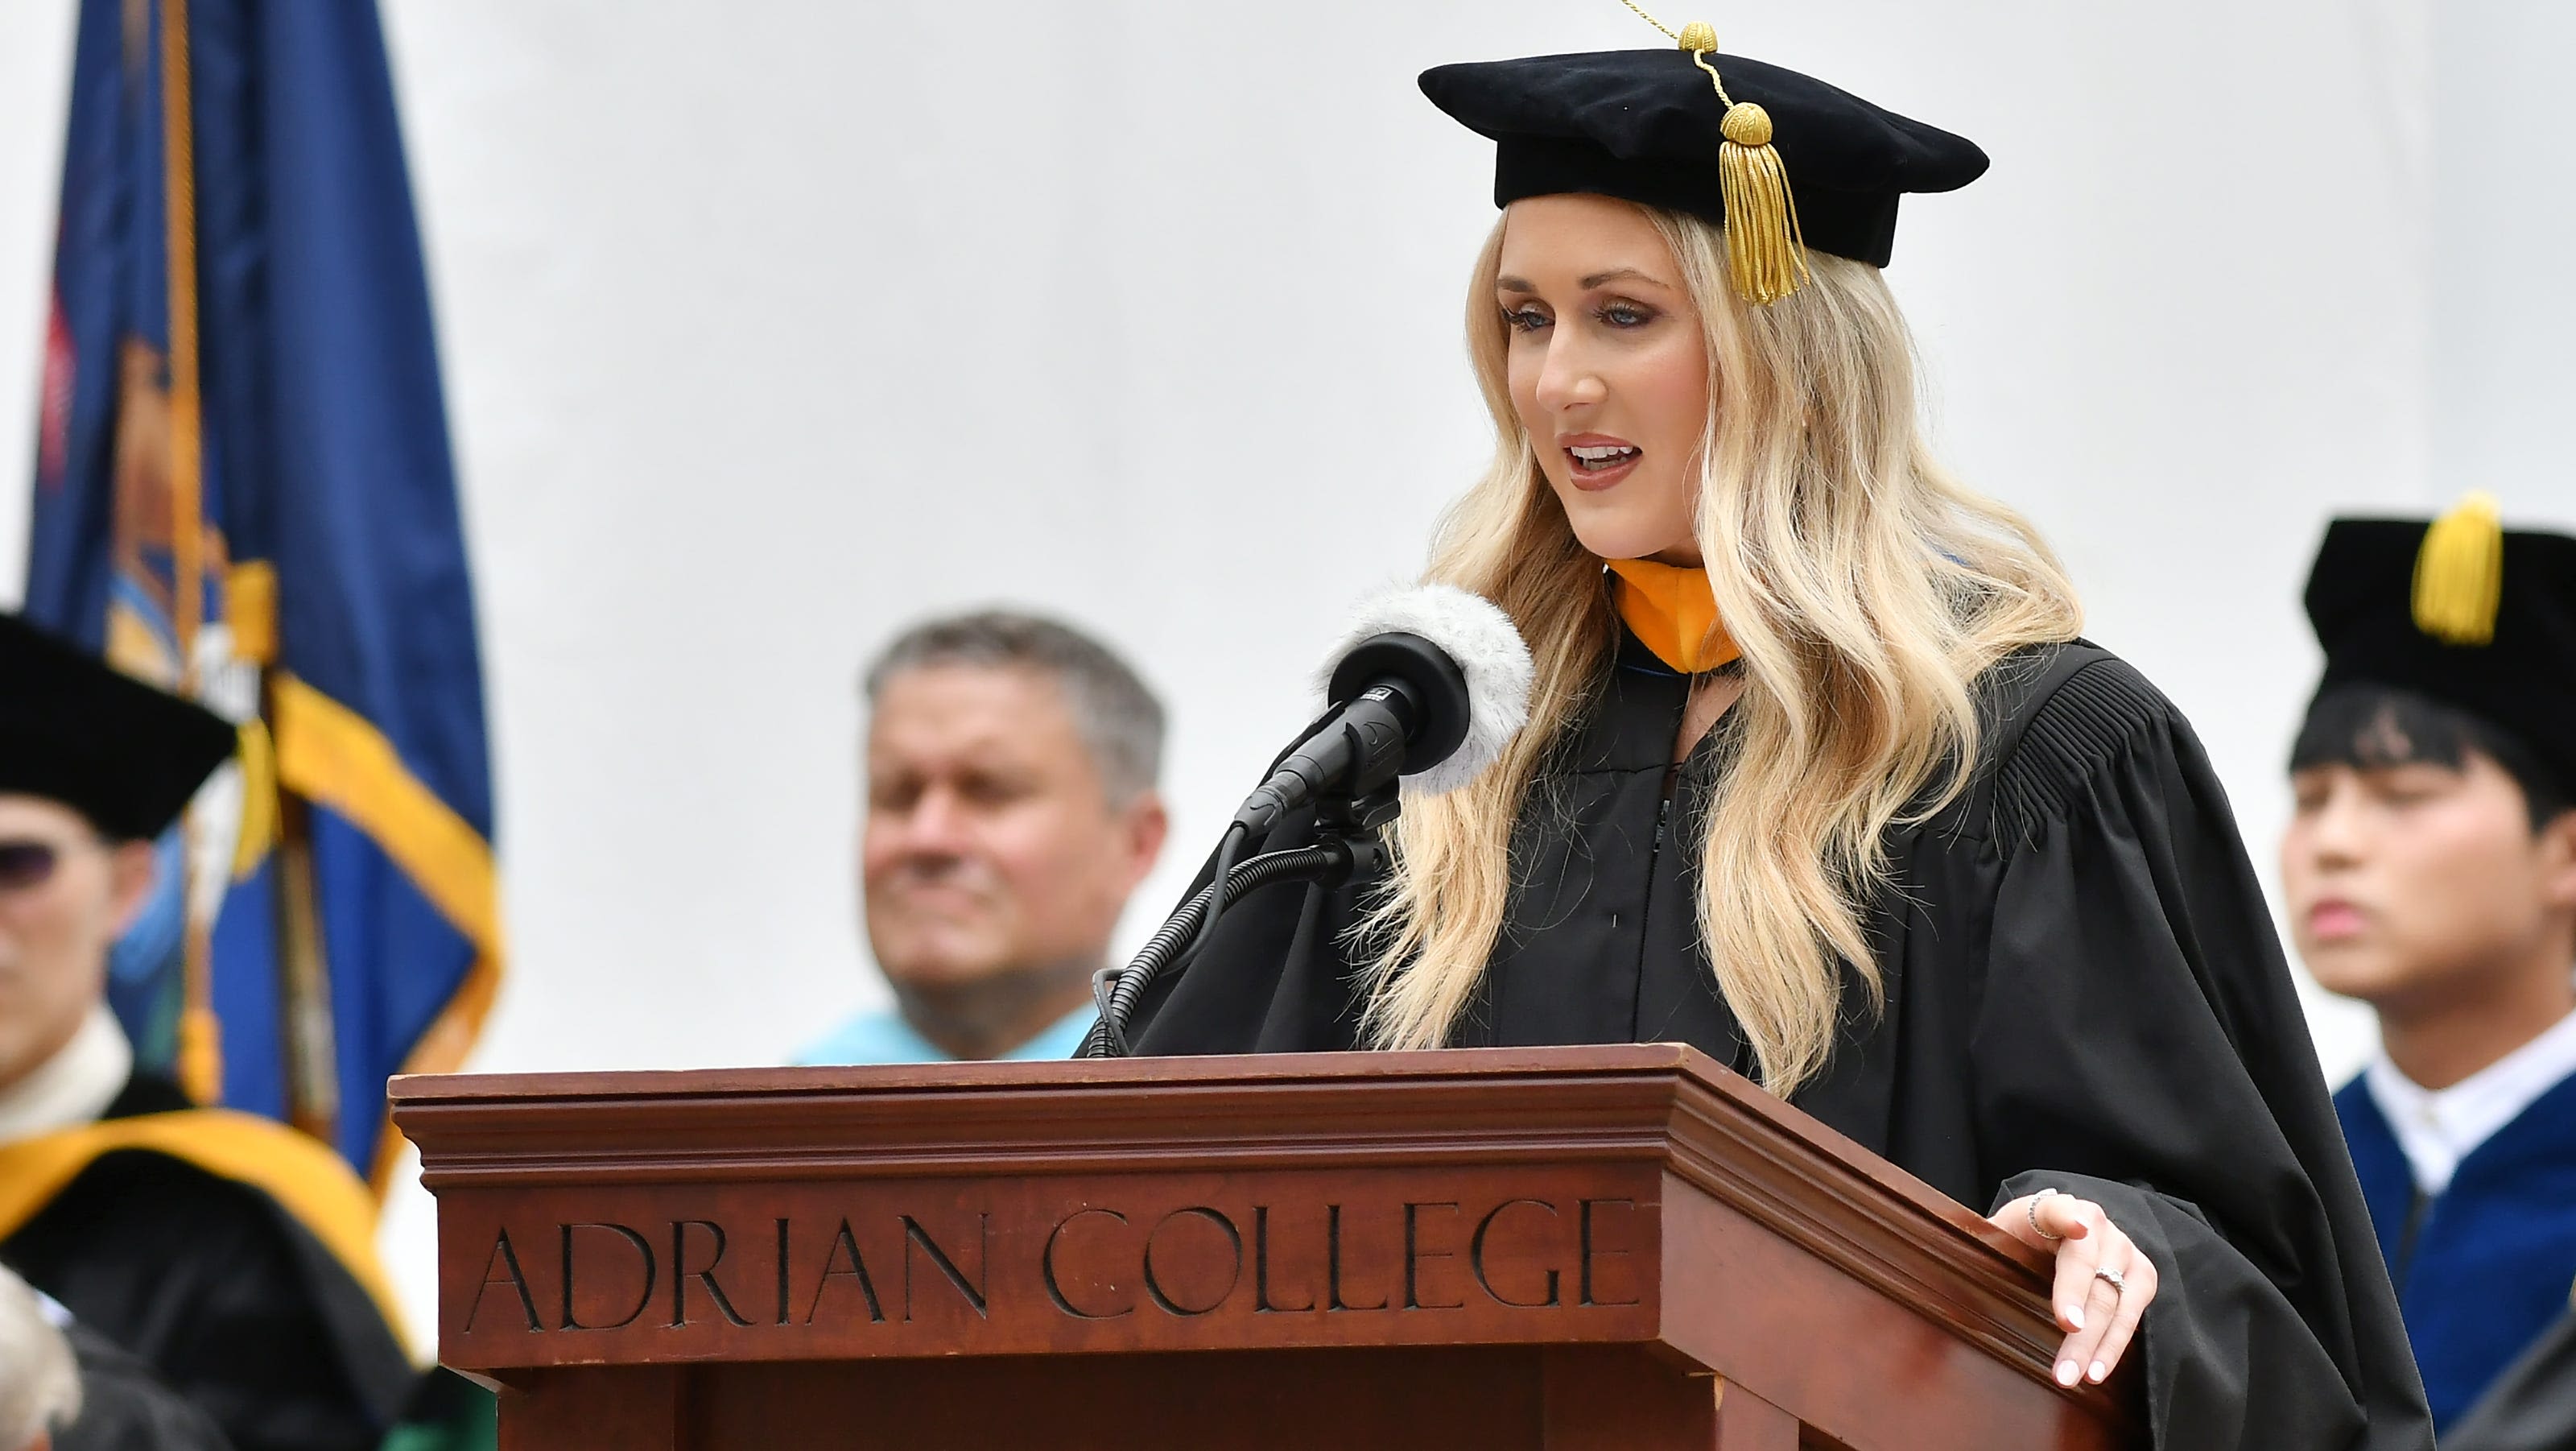 Critic of trans athletes Riley Gaines tells Adrian College grads, 'I chose to be courageous'